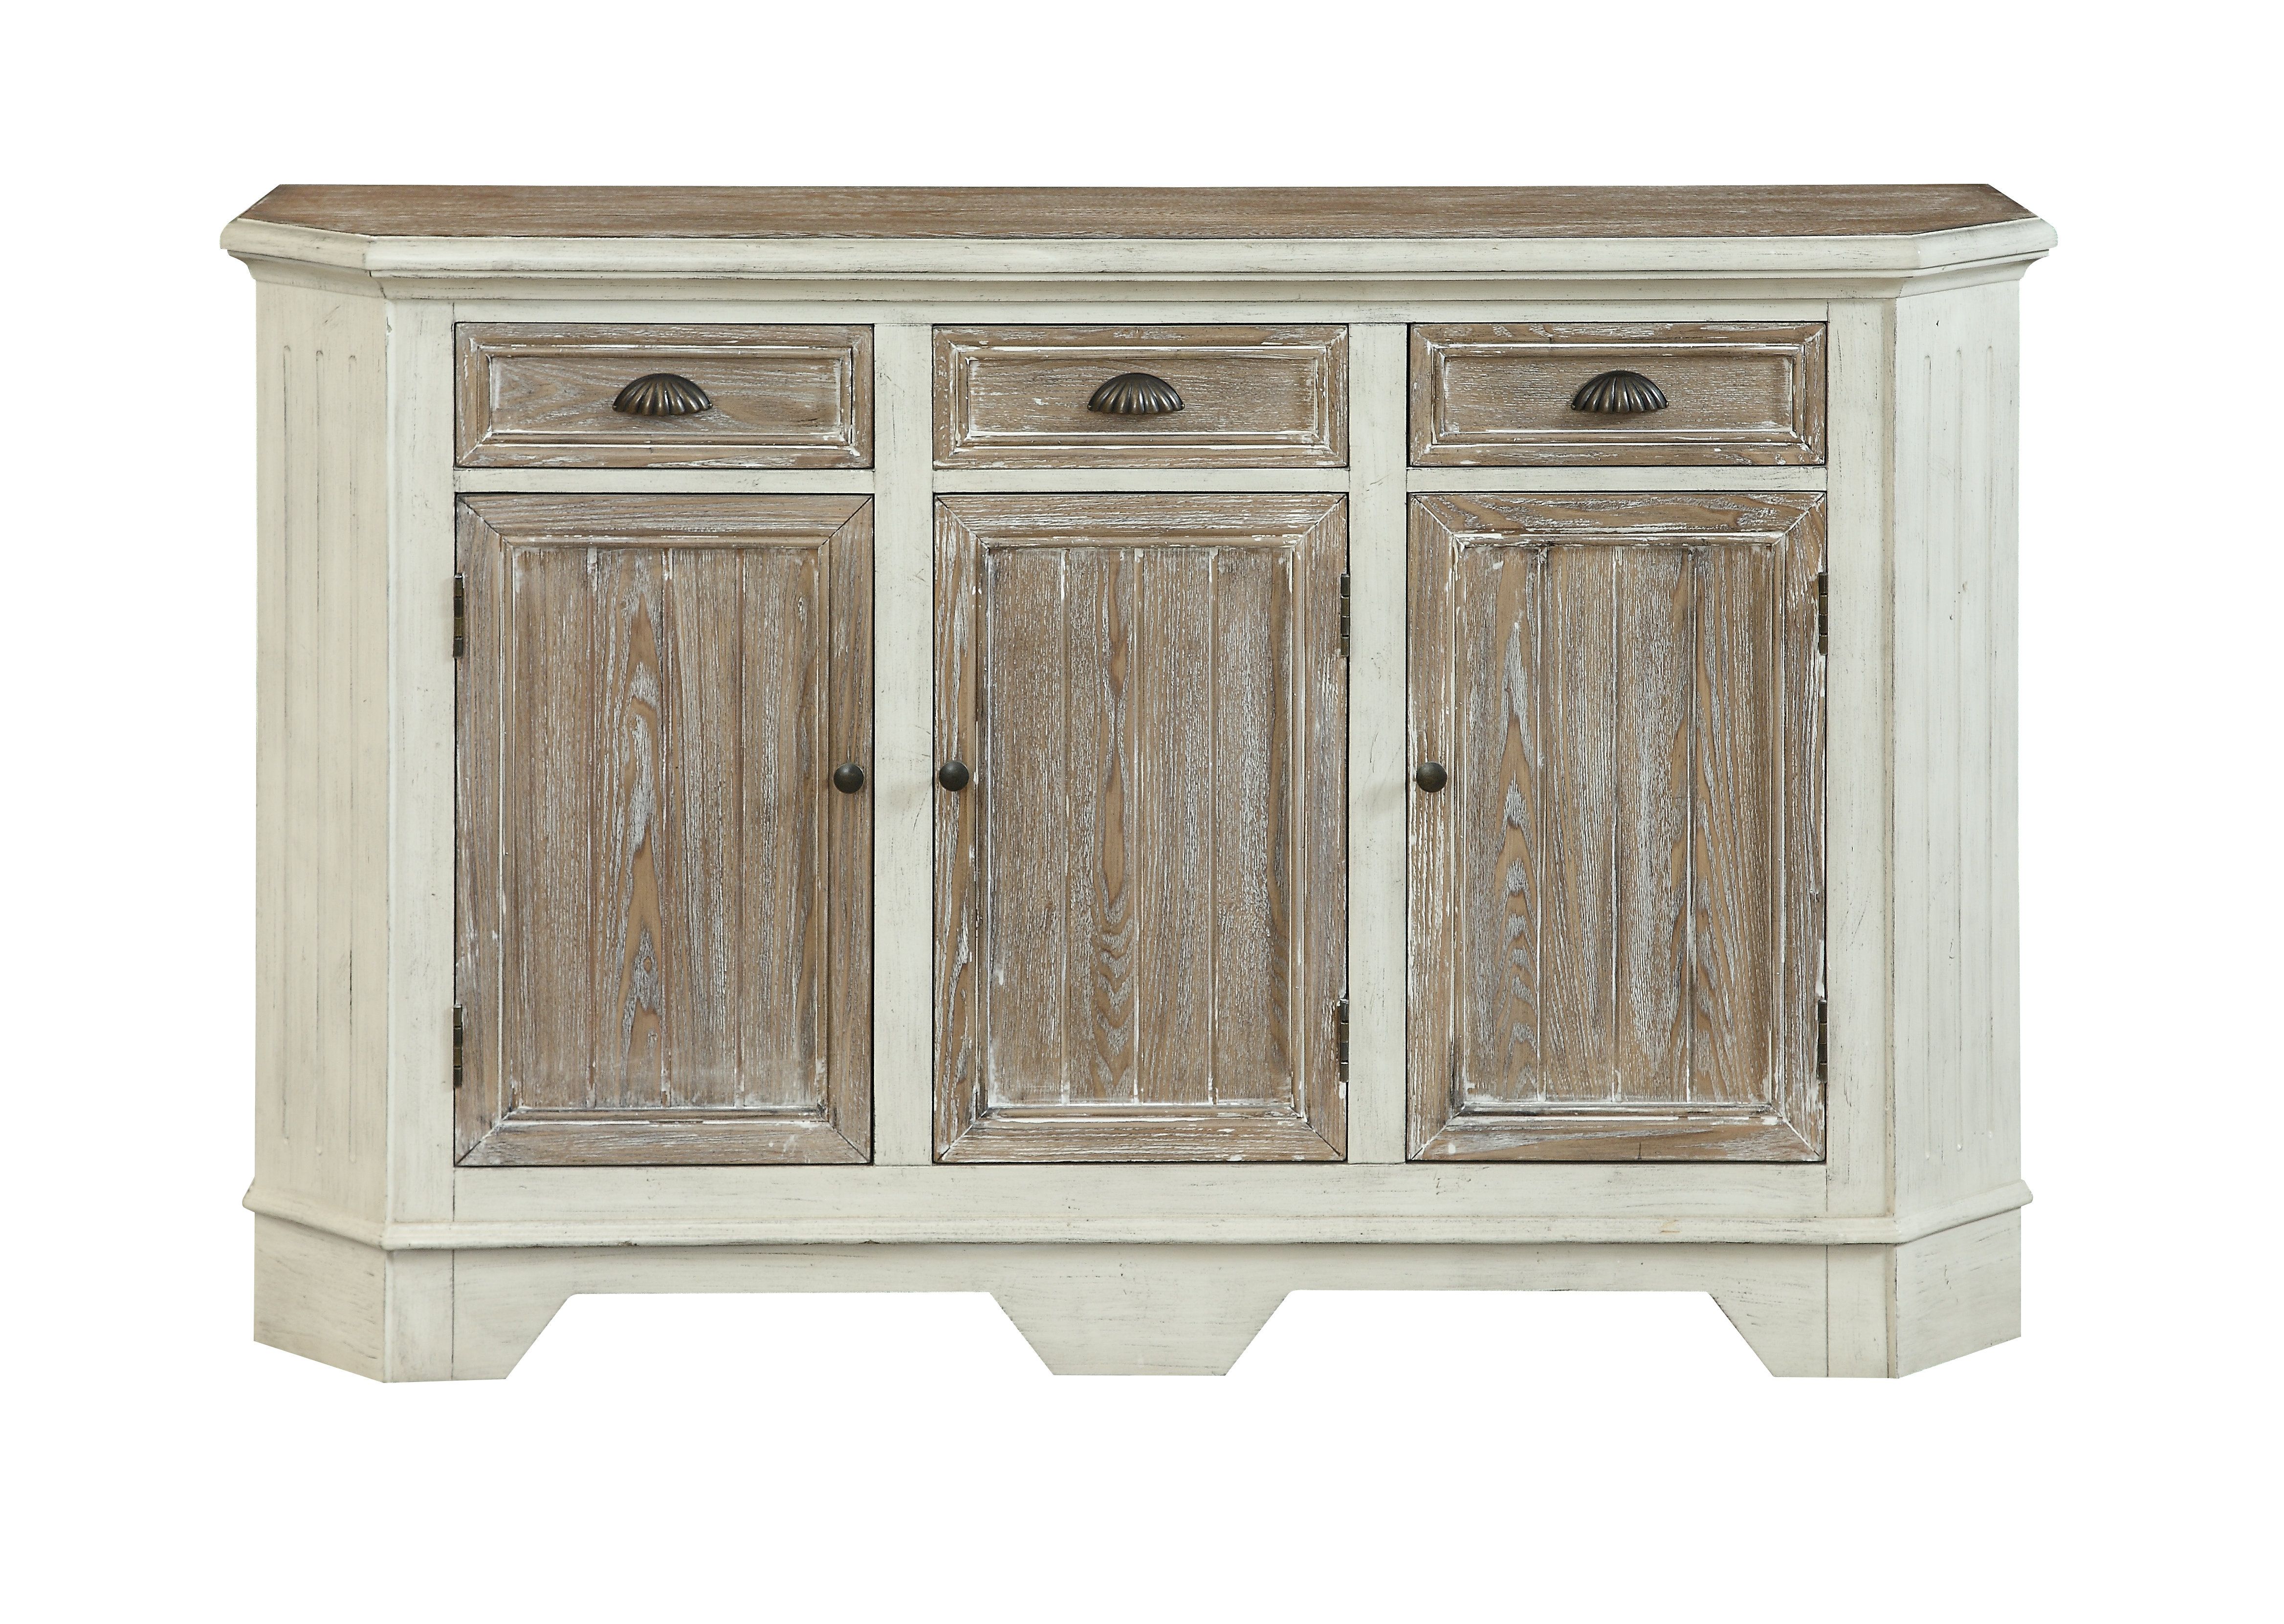 Lighted Sideboard | Wayfair For Most Popular Filkins Sideboards (View 17 of 20)